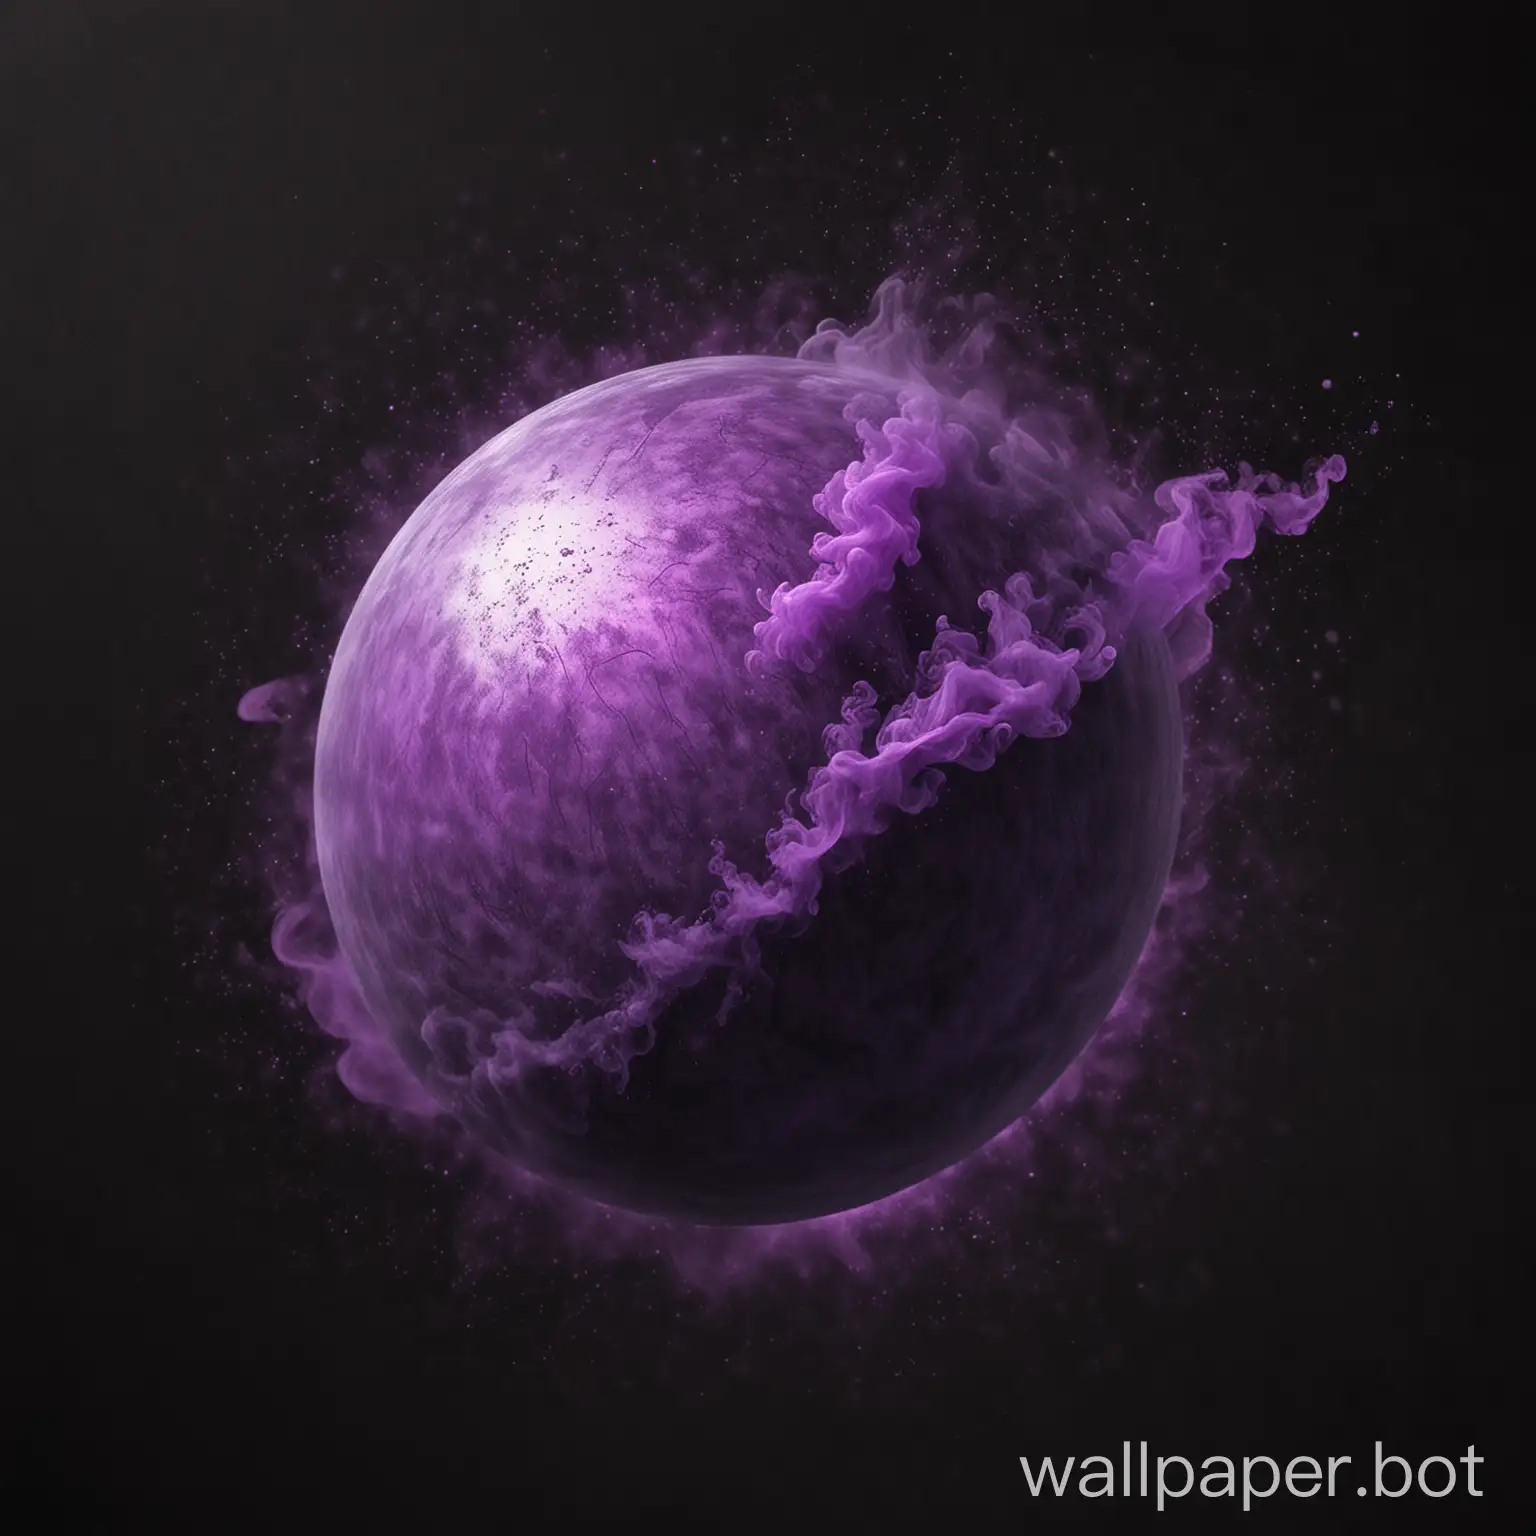 draw a sphere filled with purple mist on a black background